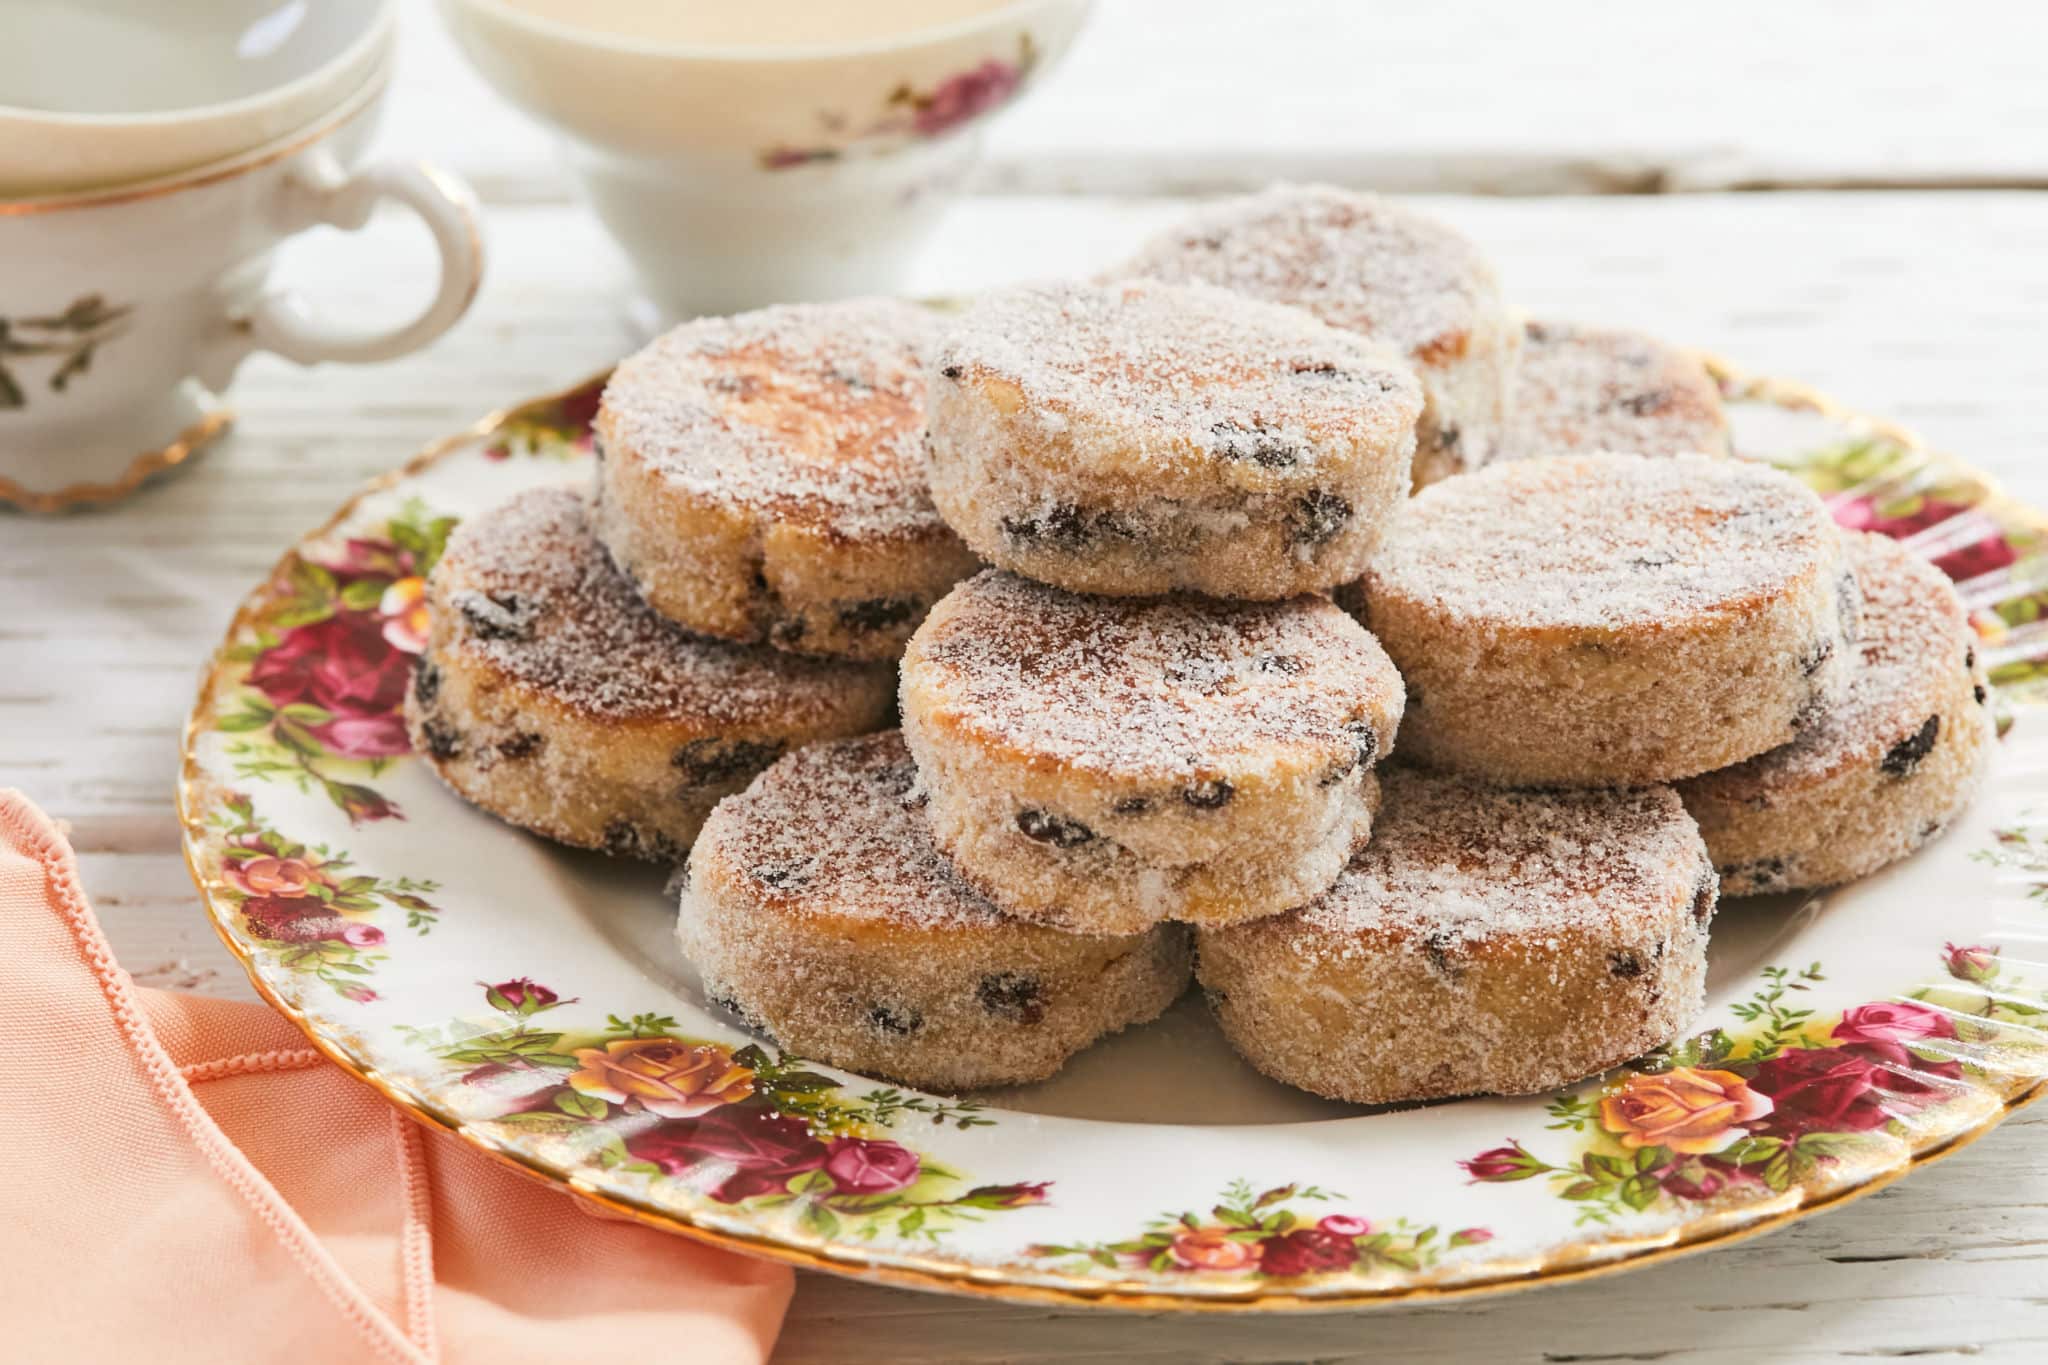 A plate full of sweet Welsh cakes.